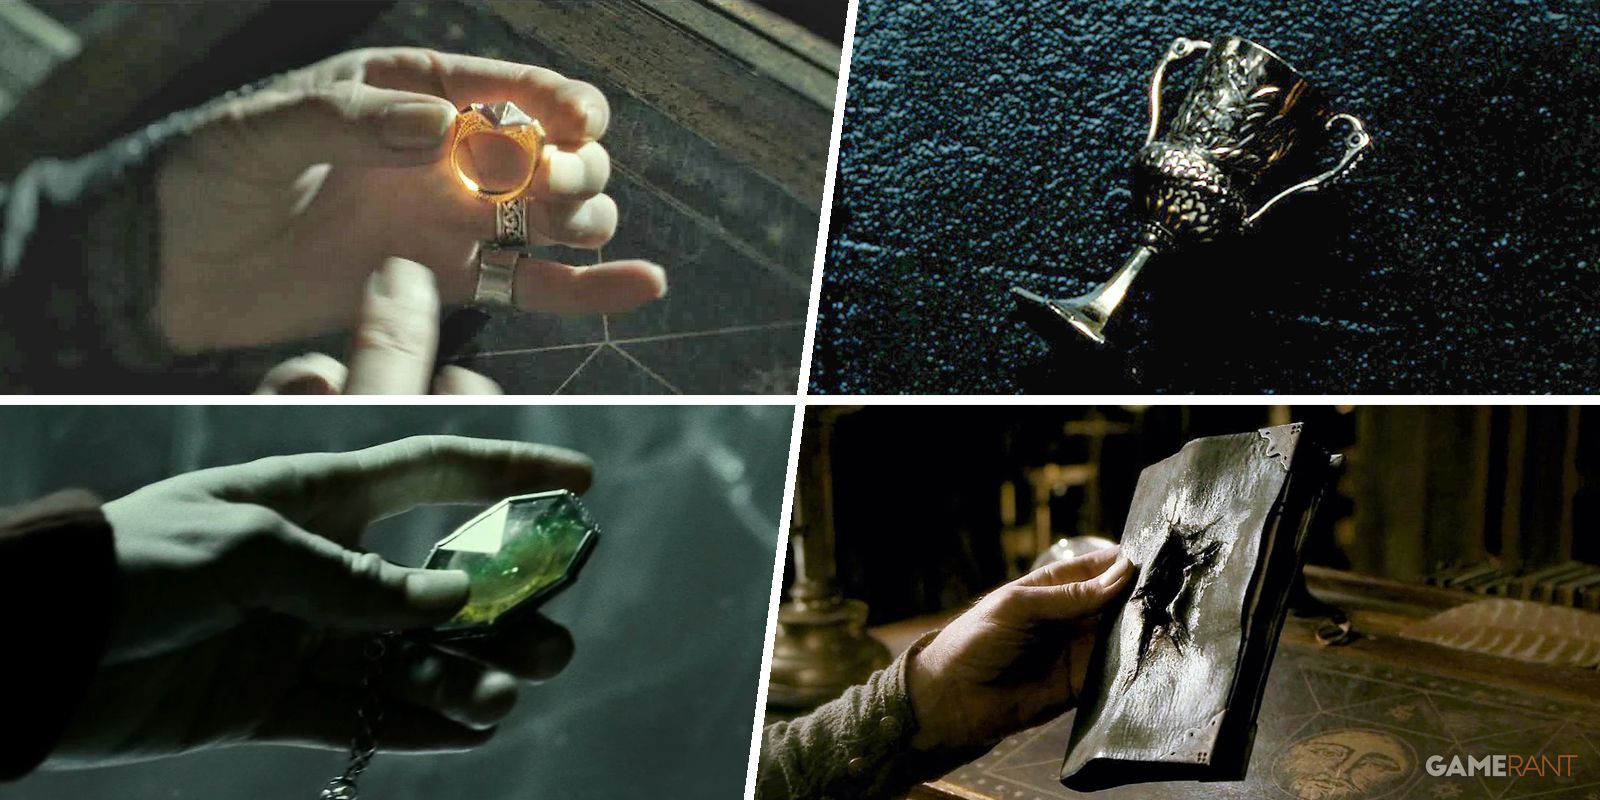 Four of Voldemort's Horcruxes from the Harry Potter movies